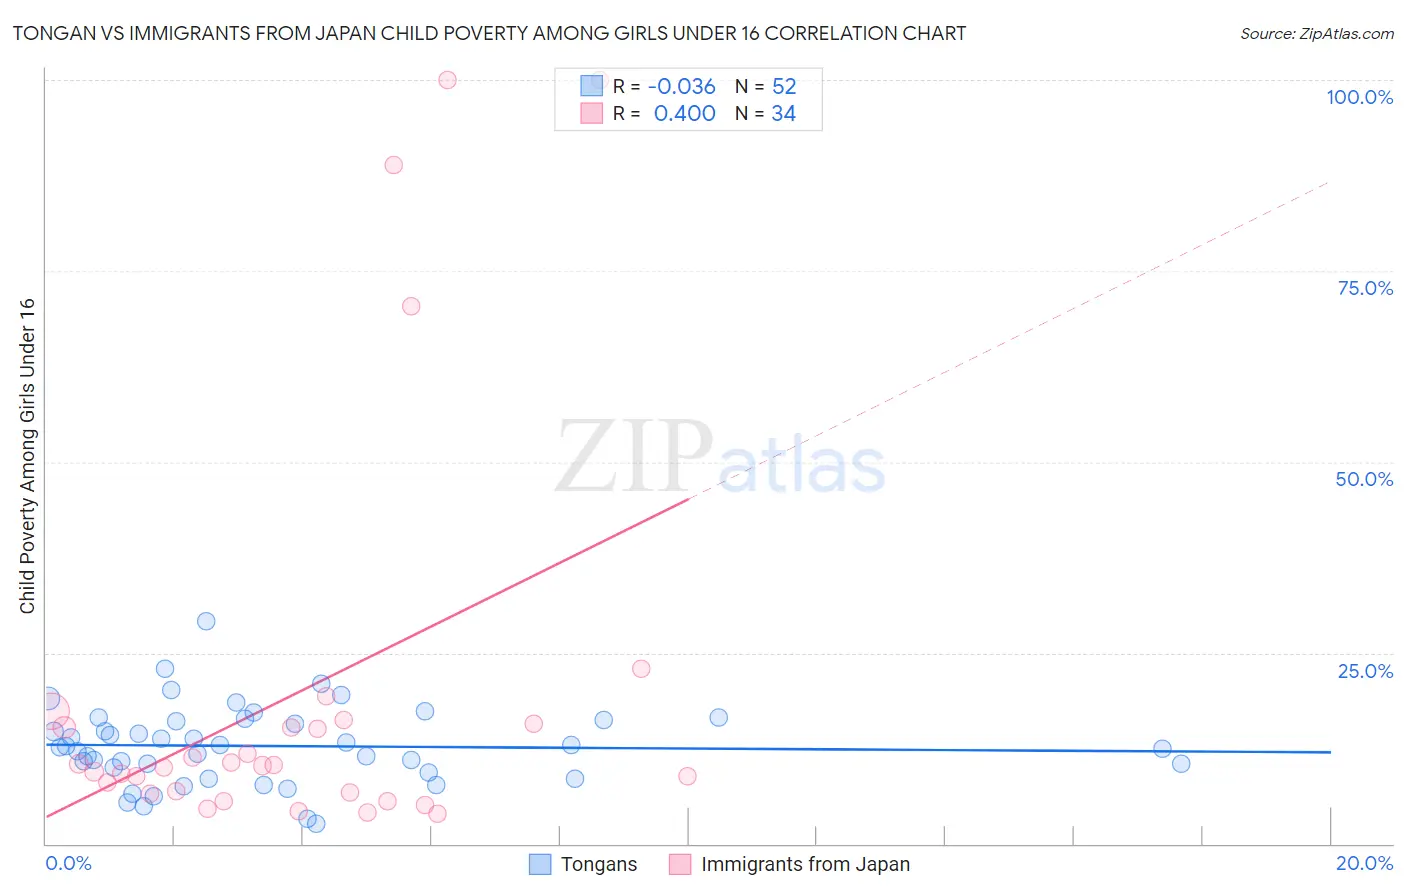 Tongan vs Immigrants from Japan Child Poverty Among Girls Under 16